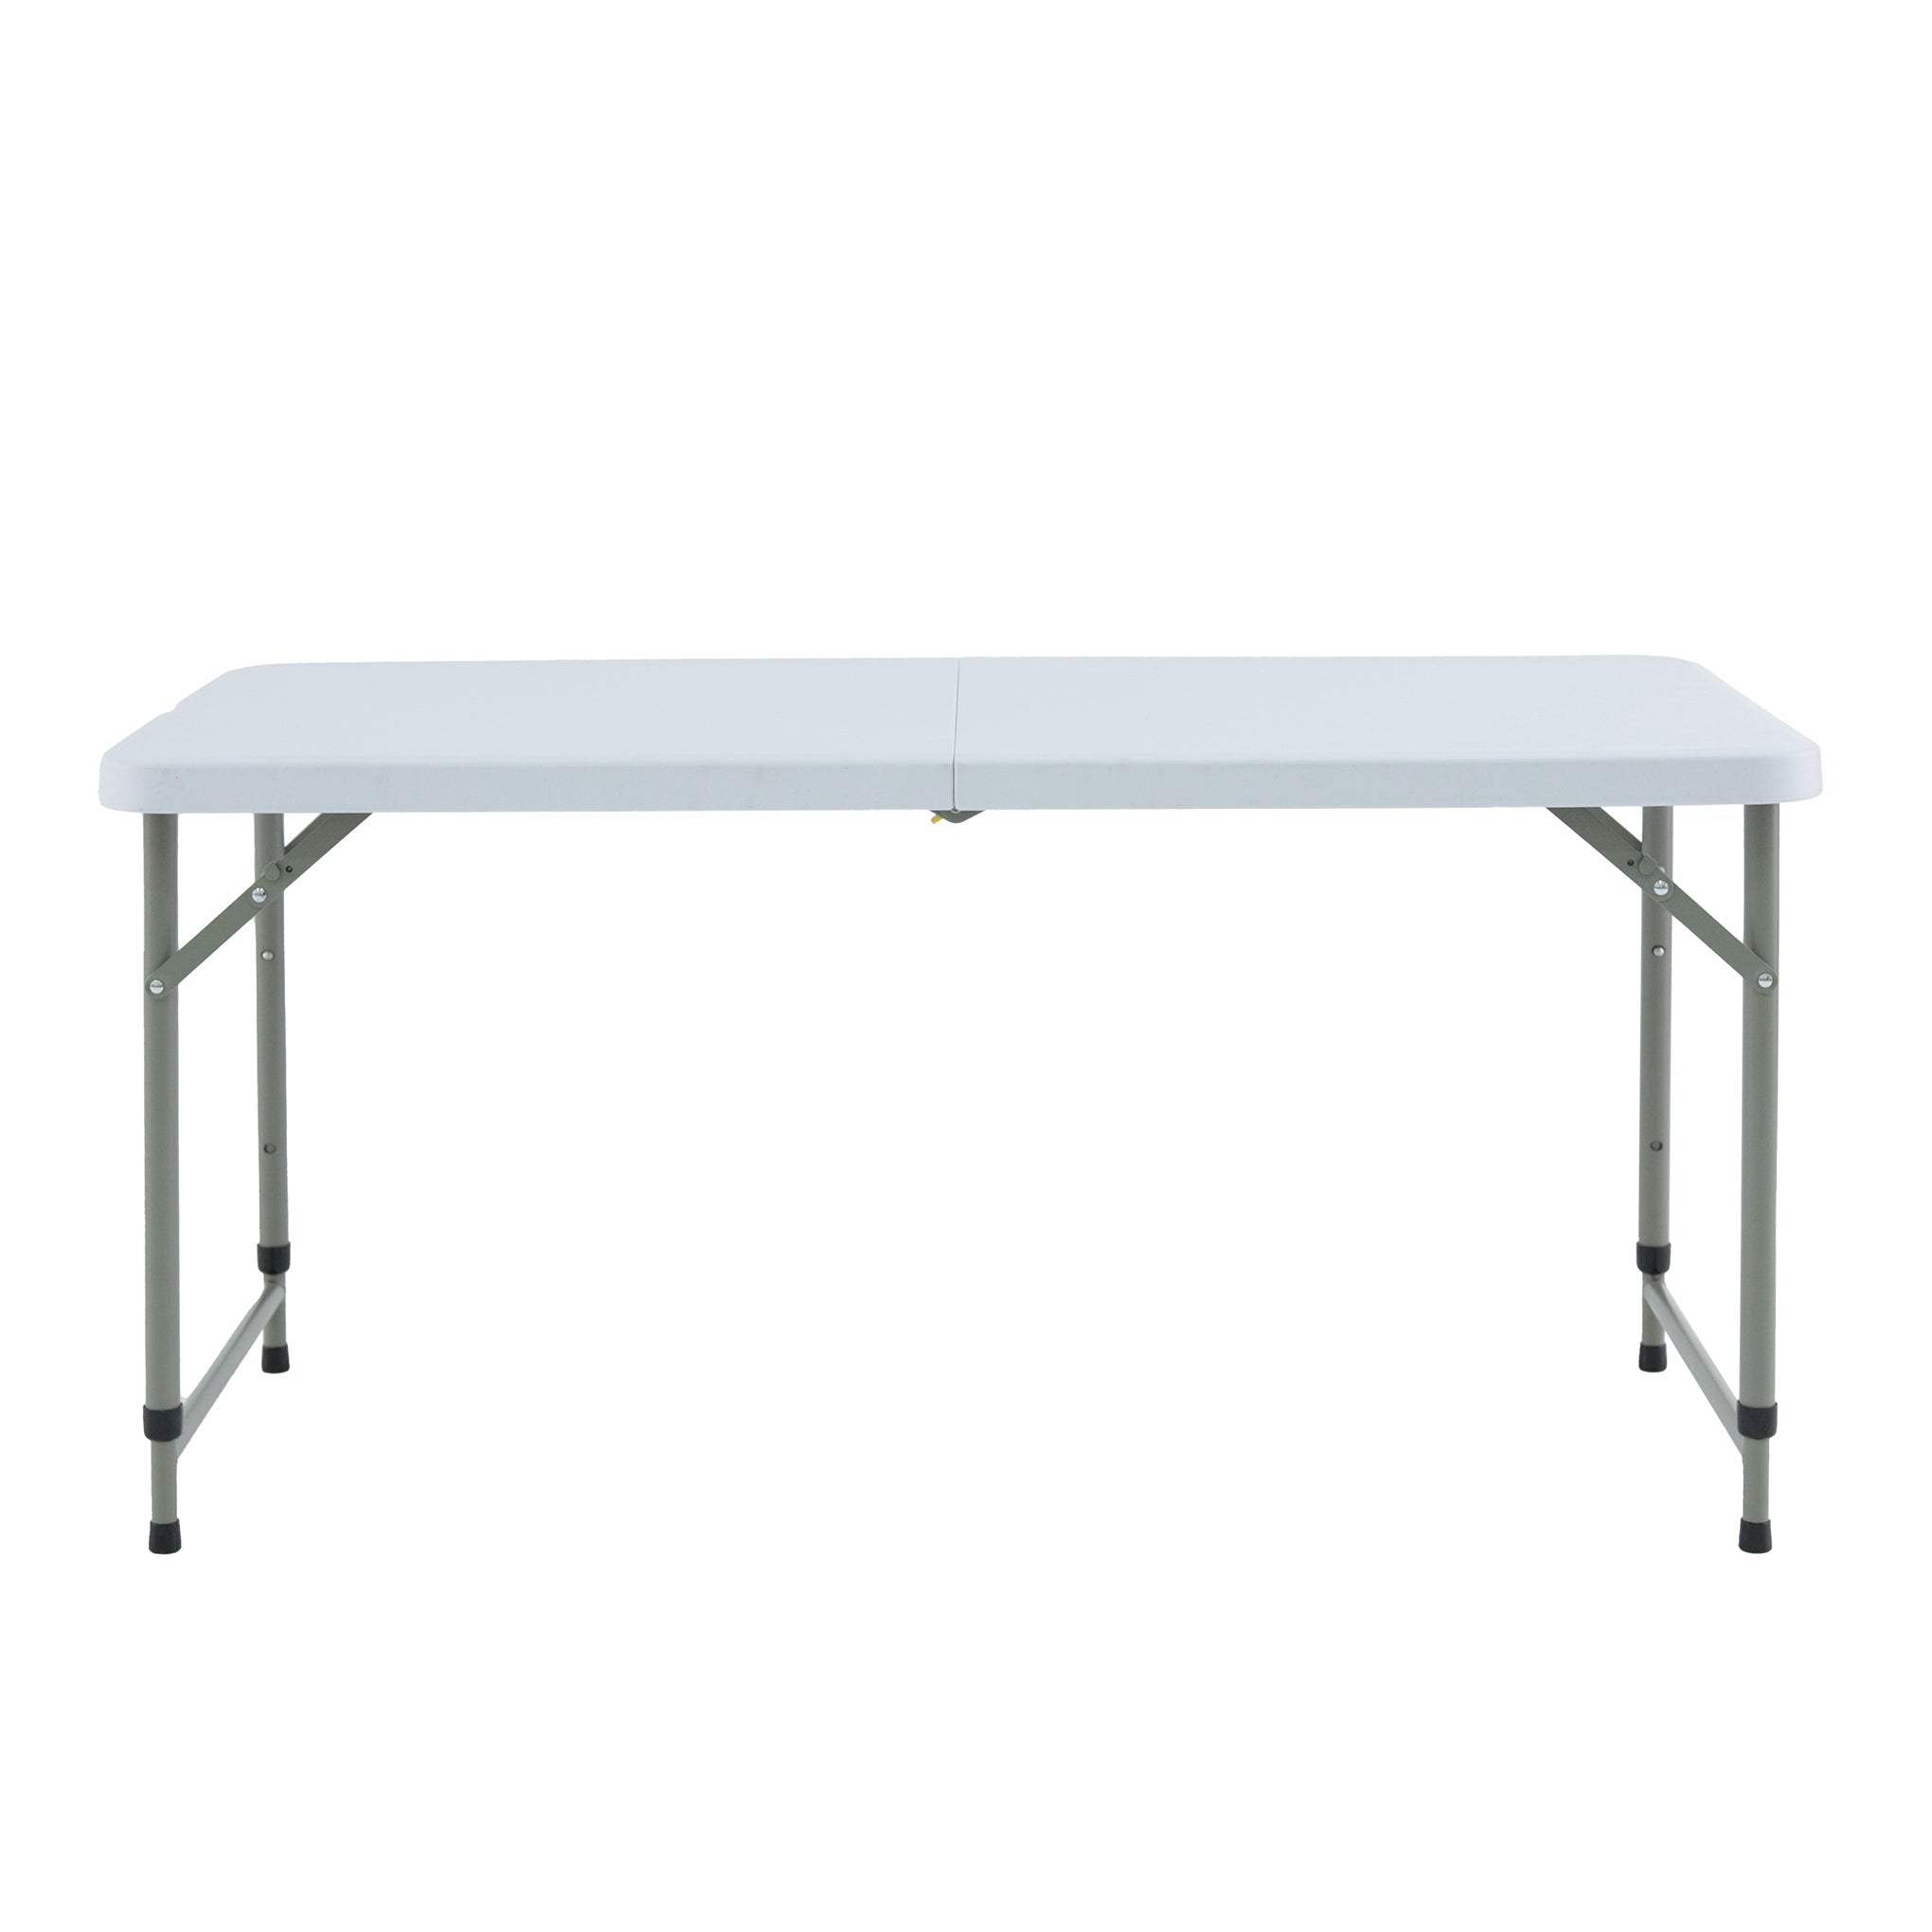 <b>Erie 4FT Rectangular HDPE Folding In Half Banquet Table With Metal Leg</b><br>L1220 X W610 X H500-740MM